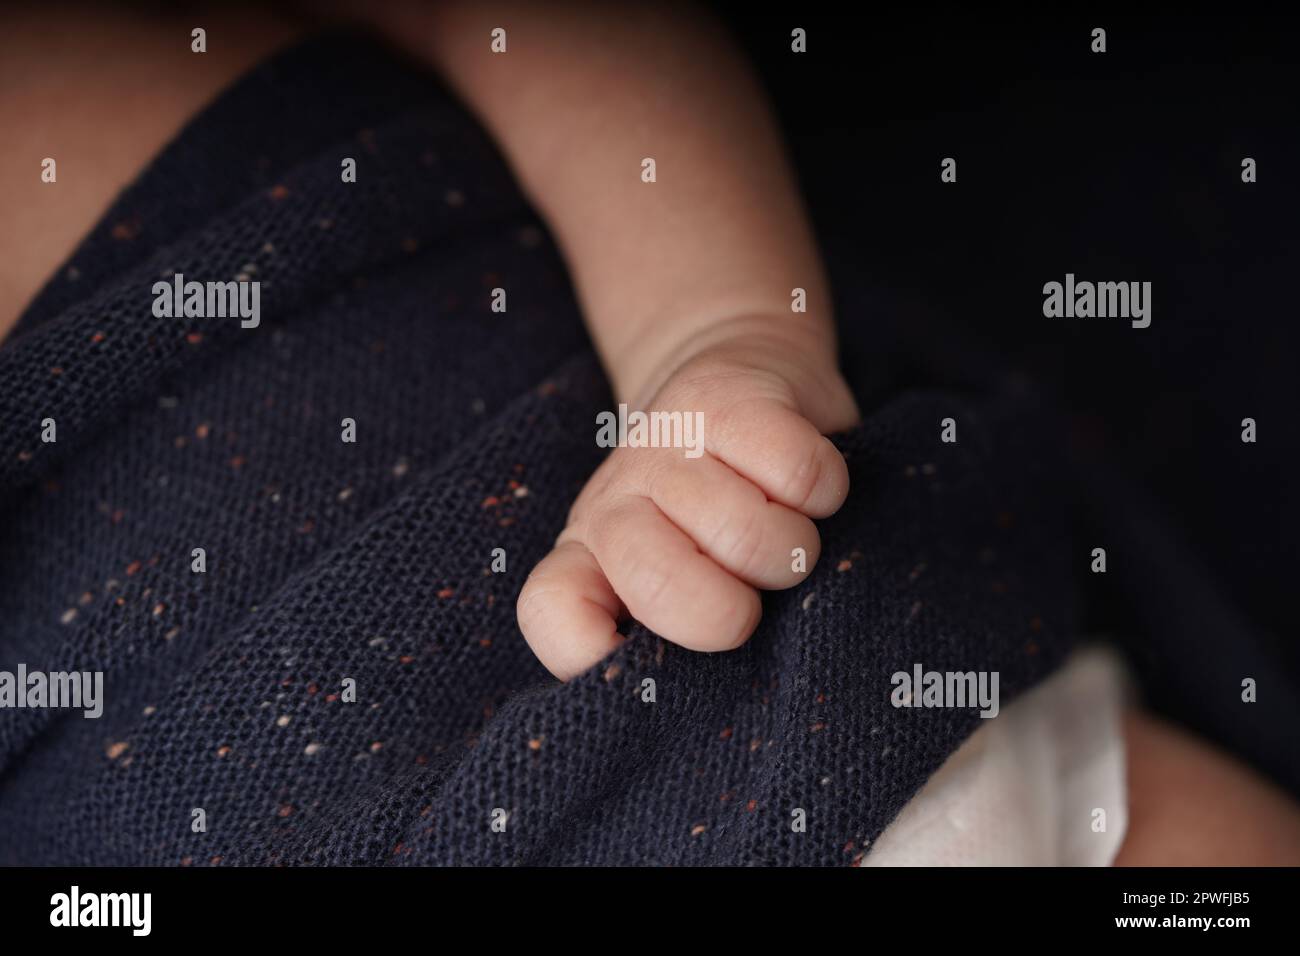 Tiny baby hands holding navy blue blanket. close-up view of the baby's cute hand the baby is laying comfortably in a blue blanket. Stock Photo